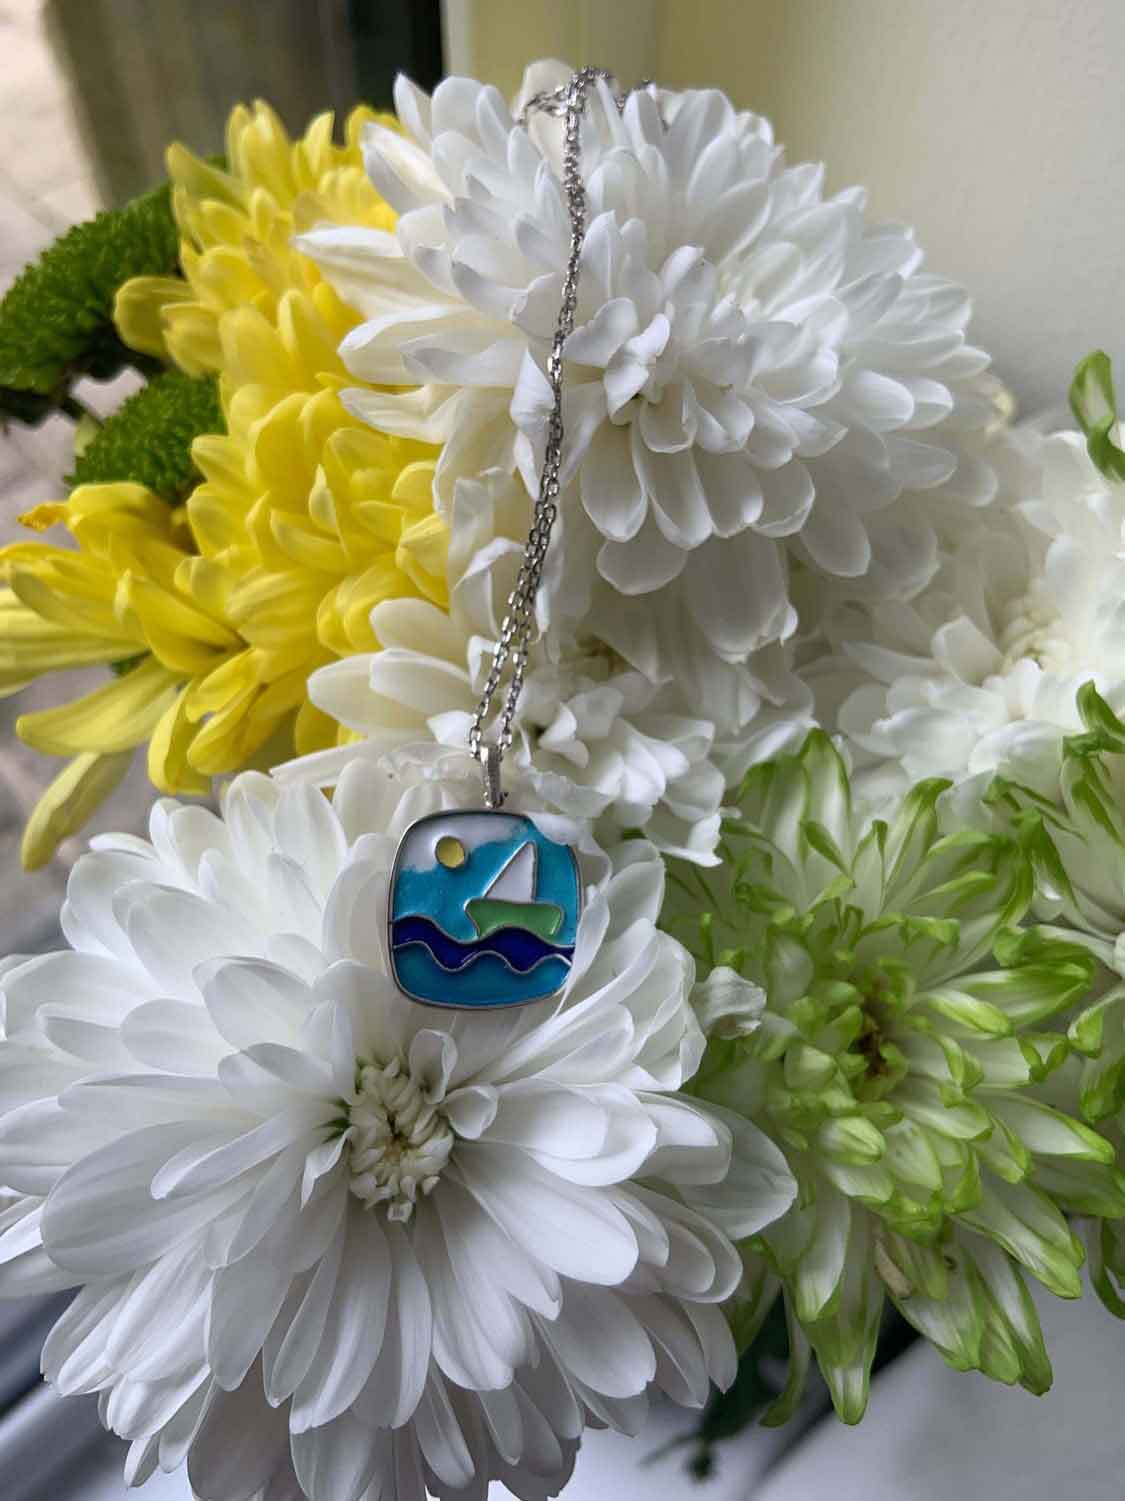 CLOISONNE HOT ENAMEL Handmade Necklace, Lucky Boat Necklace, Best Gift for Her, Love Jewelry, 925 Sterling Silver, Sea Necklace